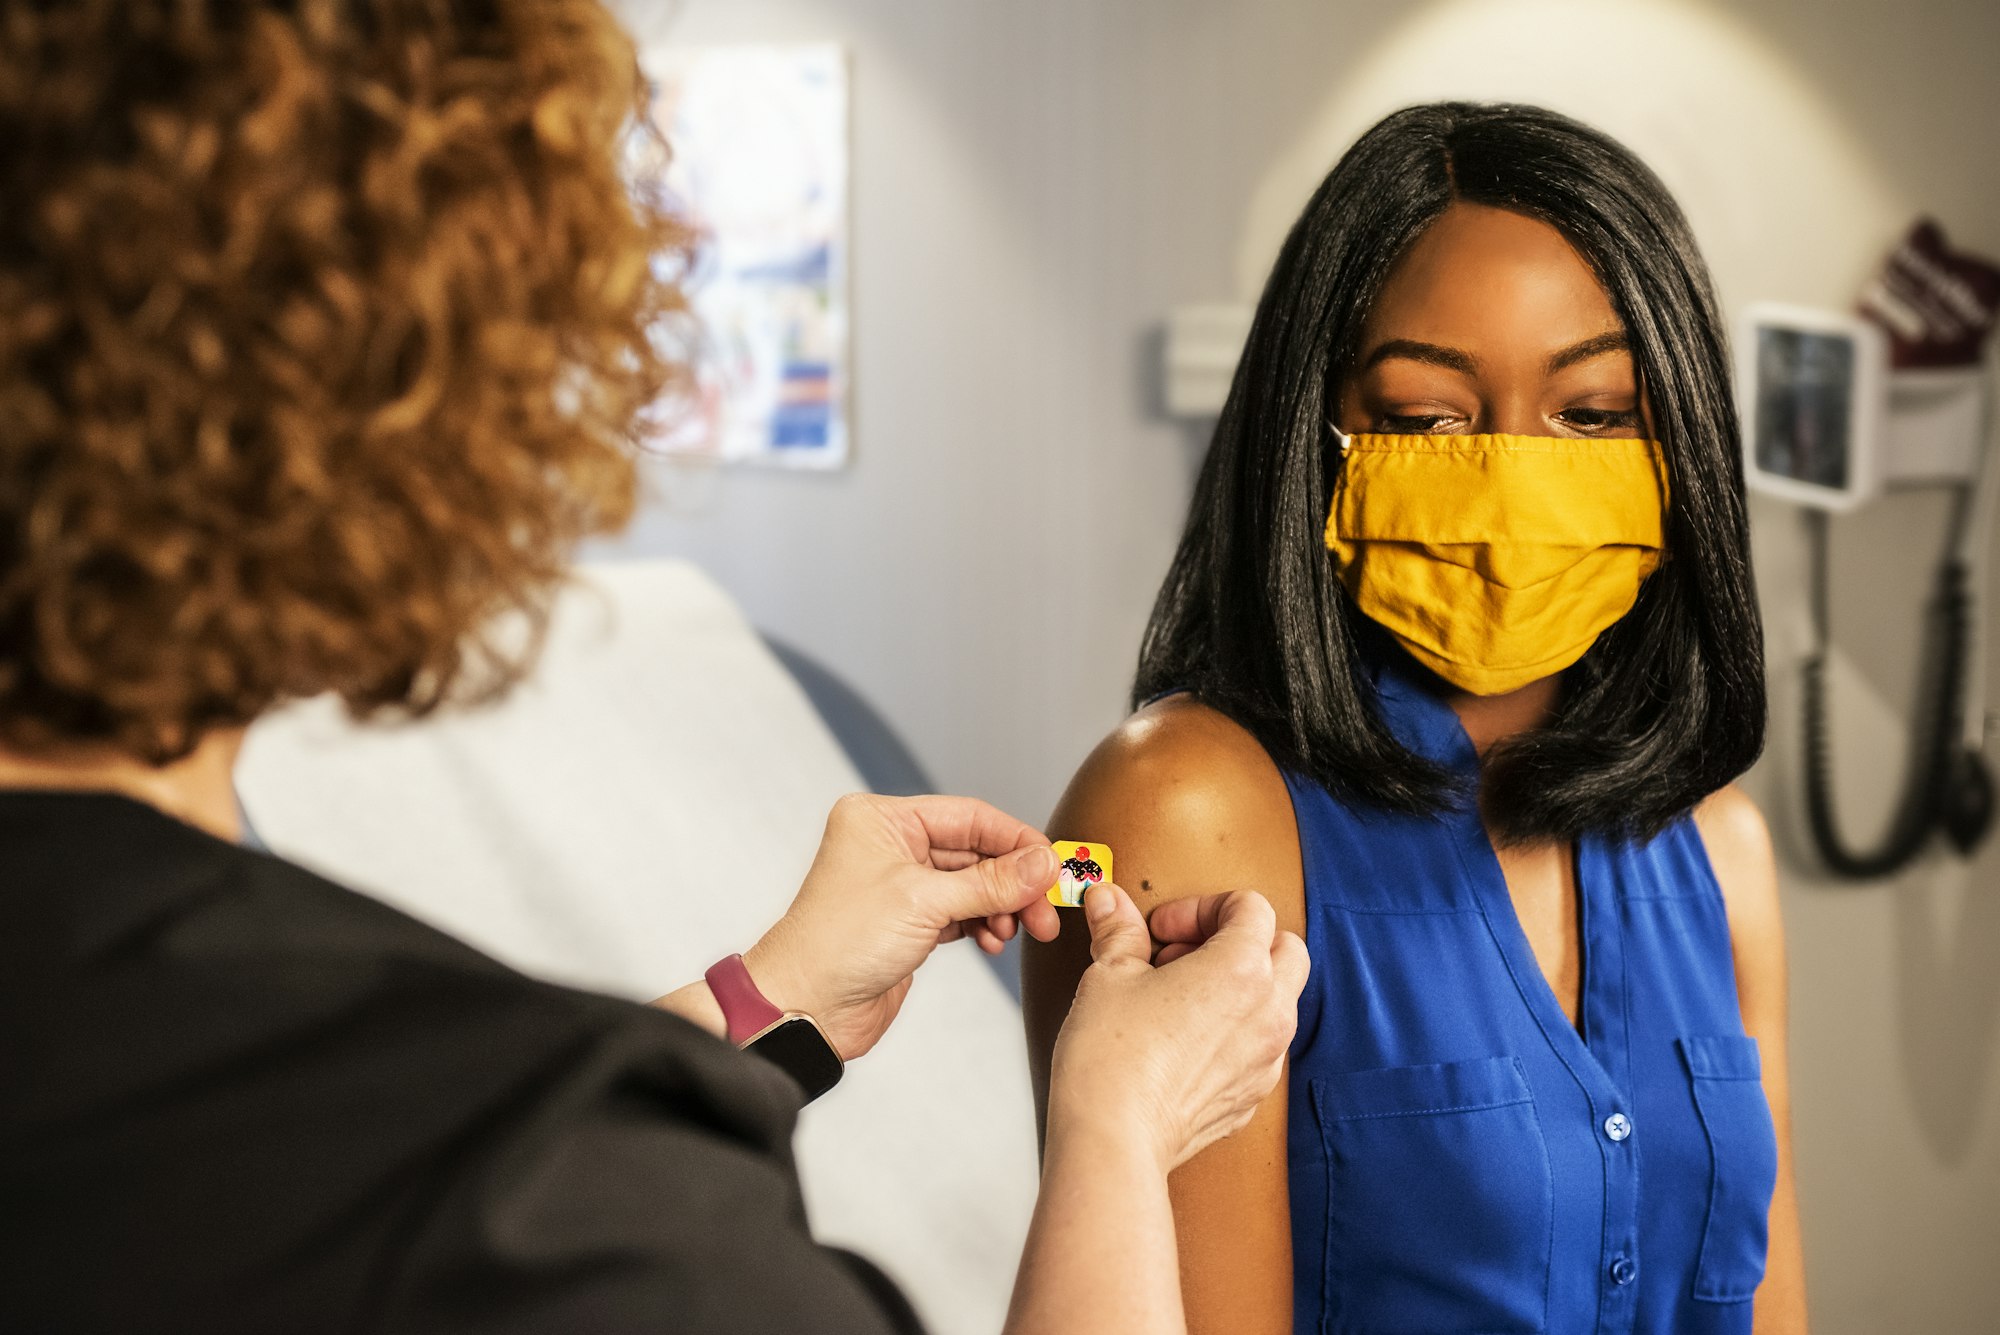 In this 2020 photograph, captured inside a clinical setting, a health care provider and patient, consult on influenza vaccine options. The best way to prevent seasonal flu illness is to get vaccinated every year. Centers for Disease Control and Prevention (CDC) recommends everyone 6-months of age and older get a flu vaccine every season. There are many vaccine options to choose from, but the most important thing, is for all people 6-months and older, get an influenza vaccine every year.